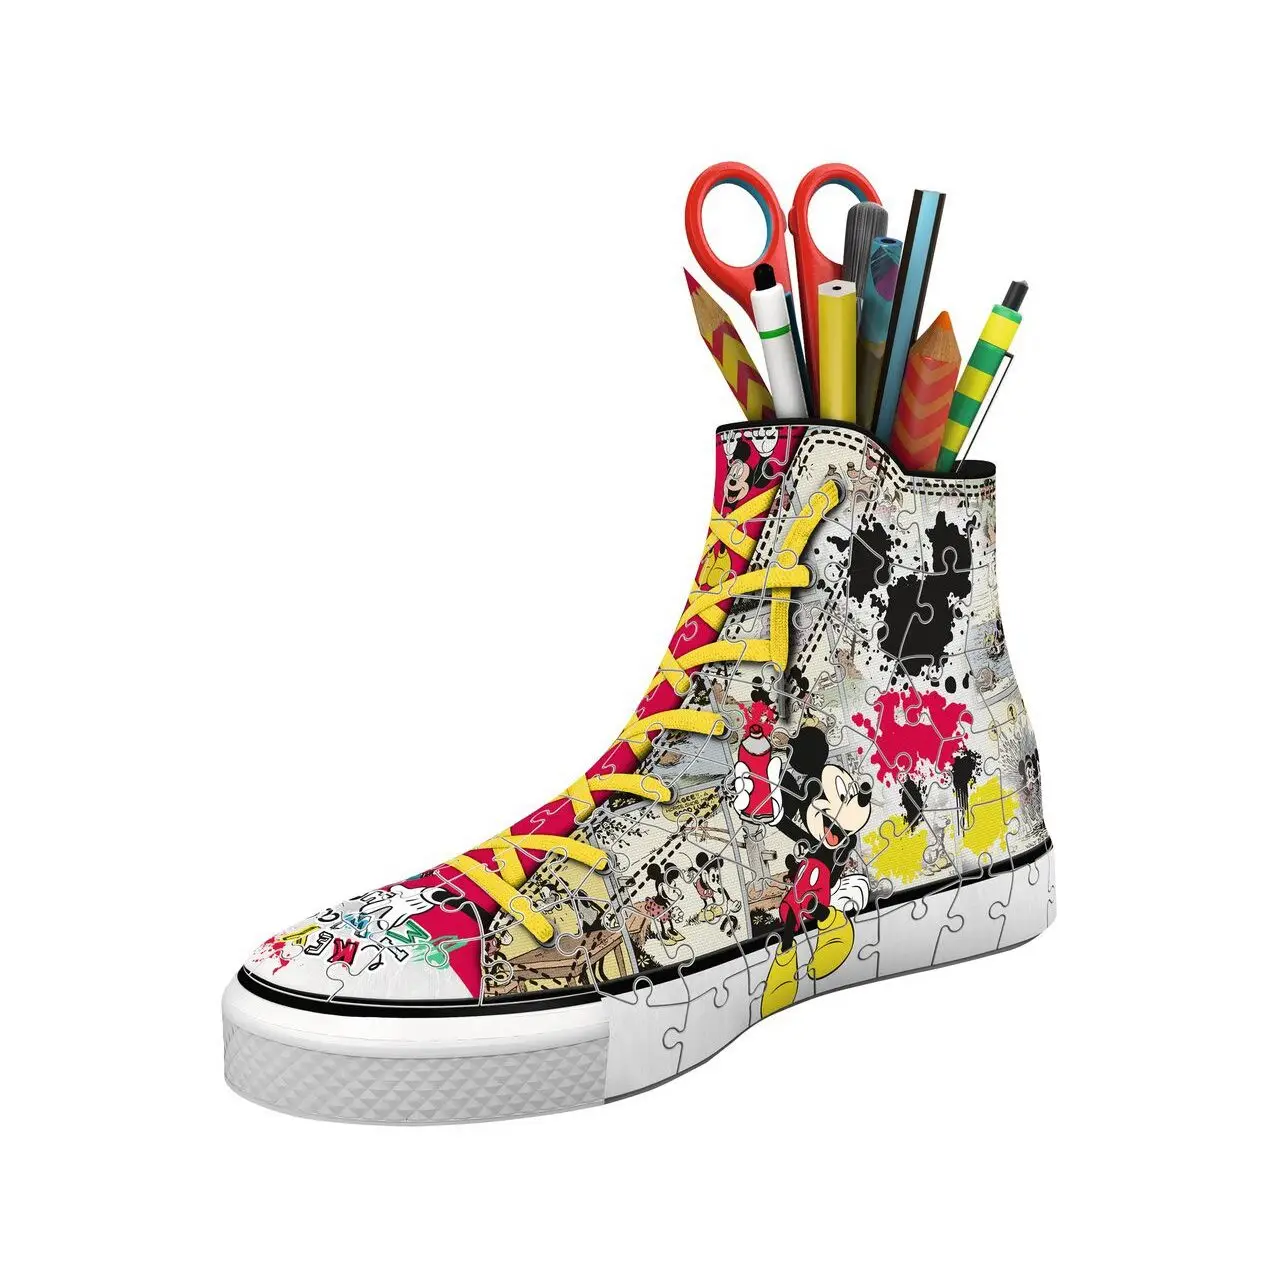 3D Puzzle Mickey Sneaker 108 Teile